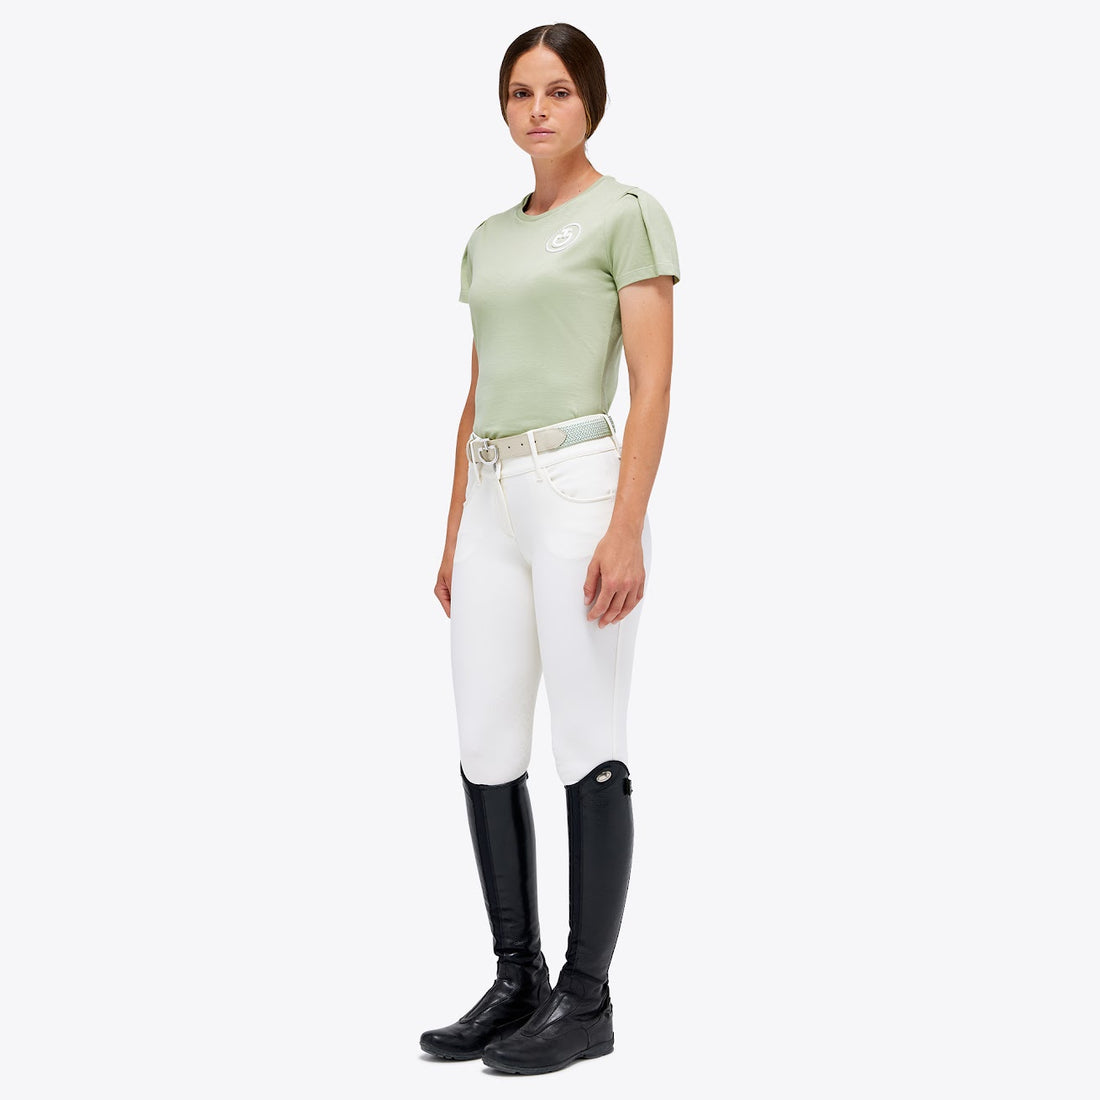 The stunning cotton puff sleeve emblem T shirt by Cavalleria Toscana in green. With a subtle pleating on the short sleeves and finished with an embroidered raised white emblem on the chest.